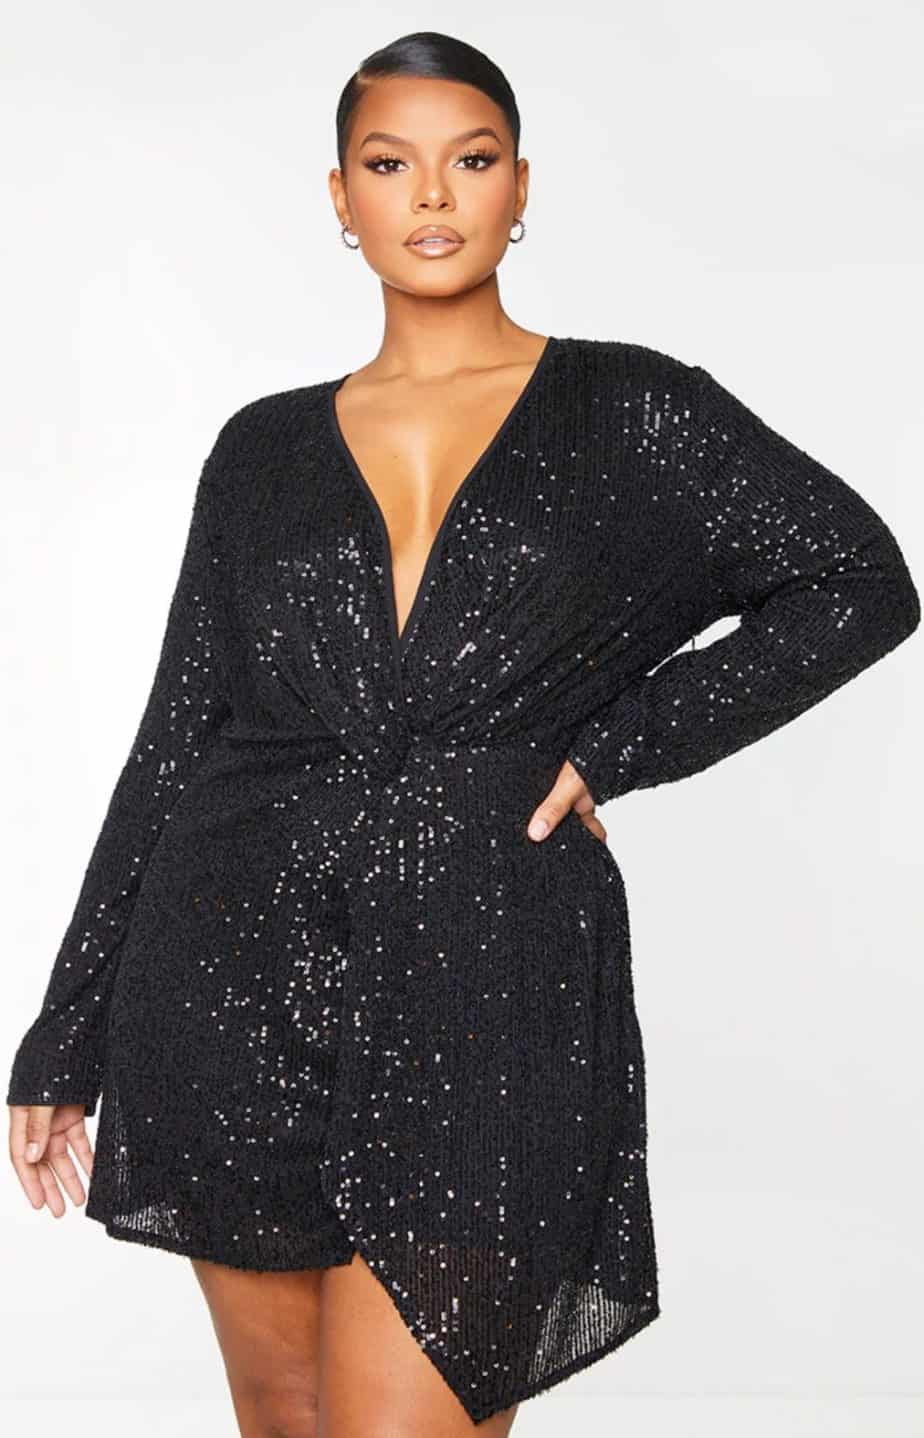 The Best Plus Size New Year's Eve Dresses Under $50 - Oge Enyi